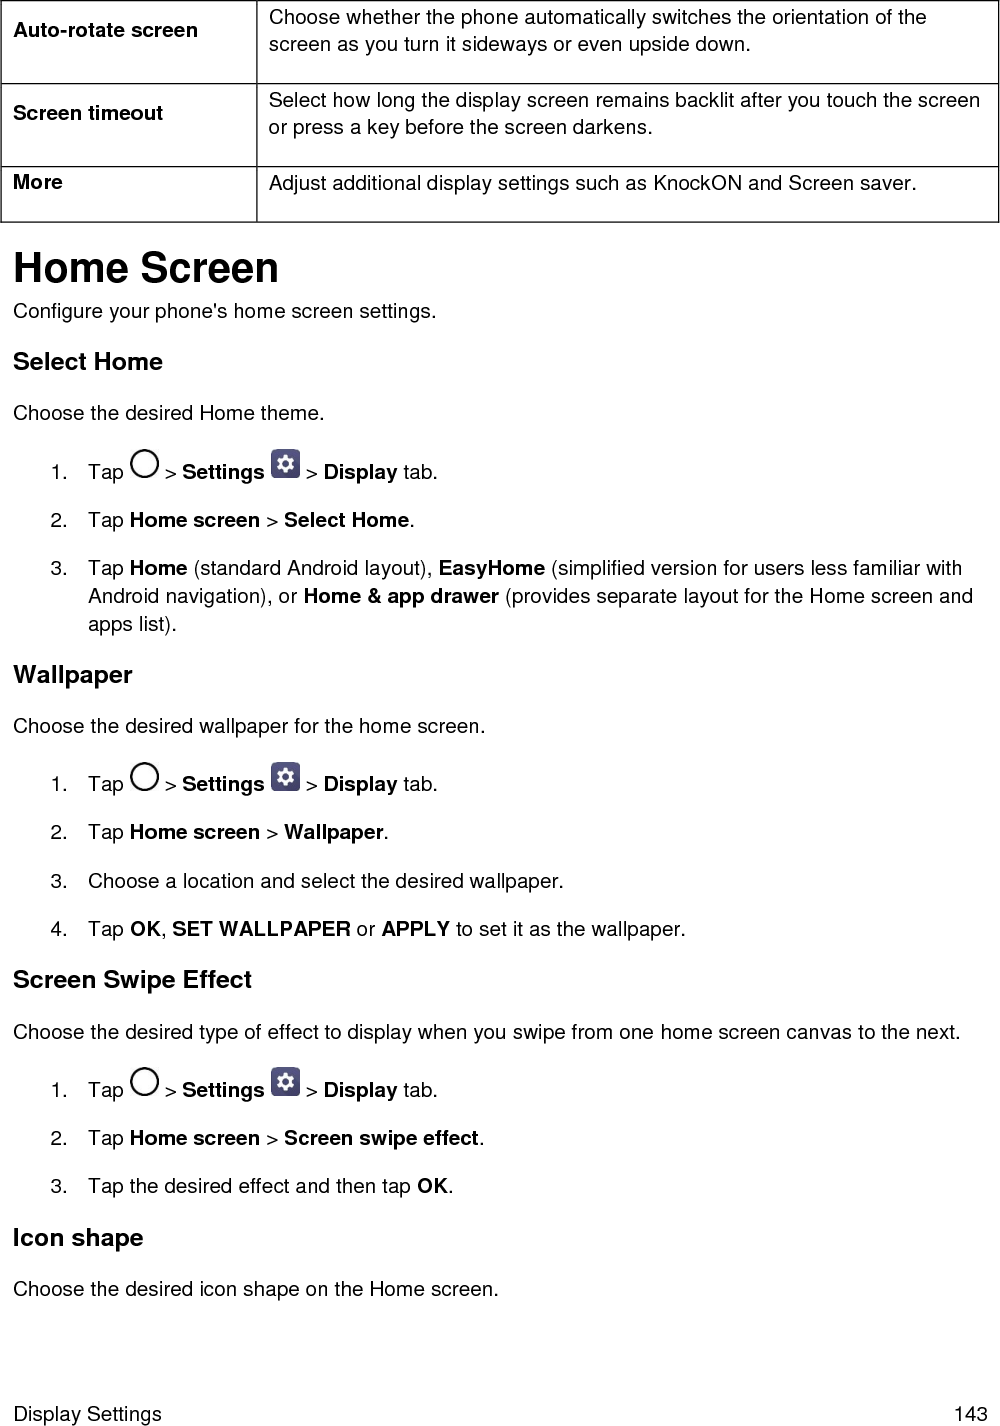  Display Settings  143 Auto-rotate screen Choose whether the phone automatically switches the orientation of the screen as you turn it sideways or even upside down. Screen timeout Select how long the display screen remains backlit after you touch the screen or press a key before the screen darkens. More Adjust additional display settings such as KnockON and Screen saver. Home Screen Configure your phone&apos;s home screen settings. Select Home Choose the desired Home theme. 1.  Tap   &gt; Settings   &gt; Display tab. 2.  Tap Home screen &gt; Select Home. 3.  Tap Home (standard Android layout), EasyHome (simplified version for users less familiar with Android navigation), or Home &amp; app drawer (provides separate layout for the Home screen and apps list). Wallpaper Choose the desired wallpaper for the home screen. 1.  Tap   &gt; Settings   &gt; Display tab. 2.  Tap Home screen &gt; Wallpaper. 3.  Choose a location and select the desired wallpaper. 4.  Tap OK, SET WALLPAPER or APPLY to set it as the wallpaper. Screen Swipe Effect Choose the desired type of effect to display when you swipe from one home screen canvas to the next. 1.  Tap   &gt; Settings   &gt; Display tab. 2.  Tap Home screen &gt; Screen swipe effect. 3.  Tap the desired effect and then tap OK. Icon shape Choose the desired icon shape on the Home screen.  